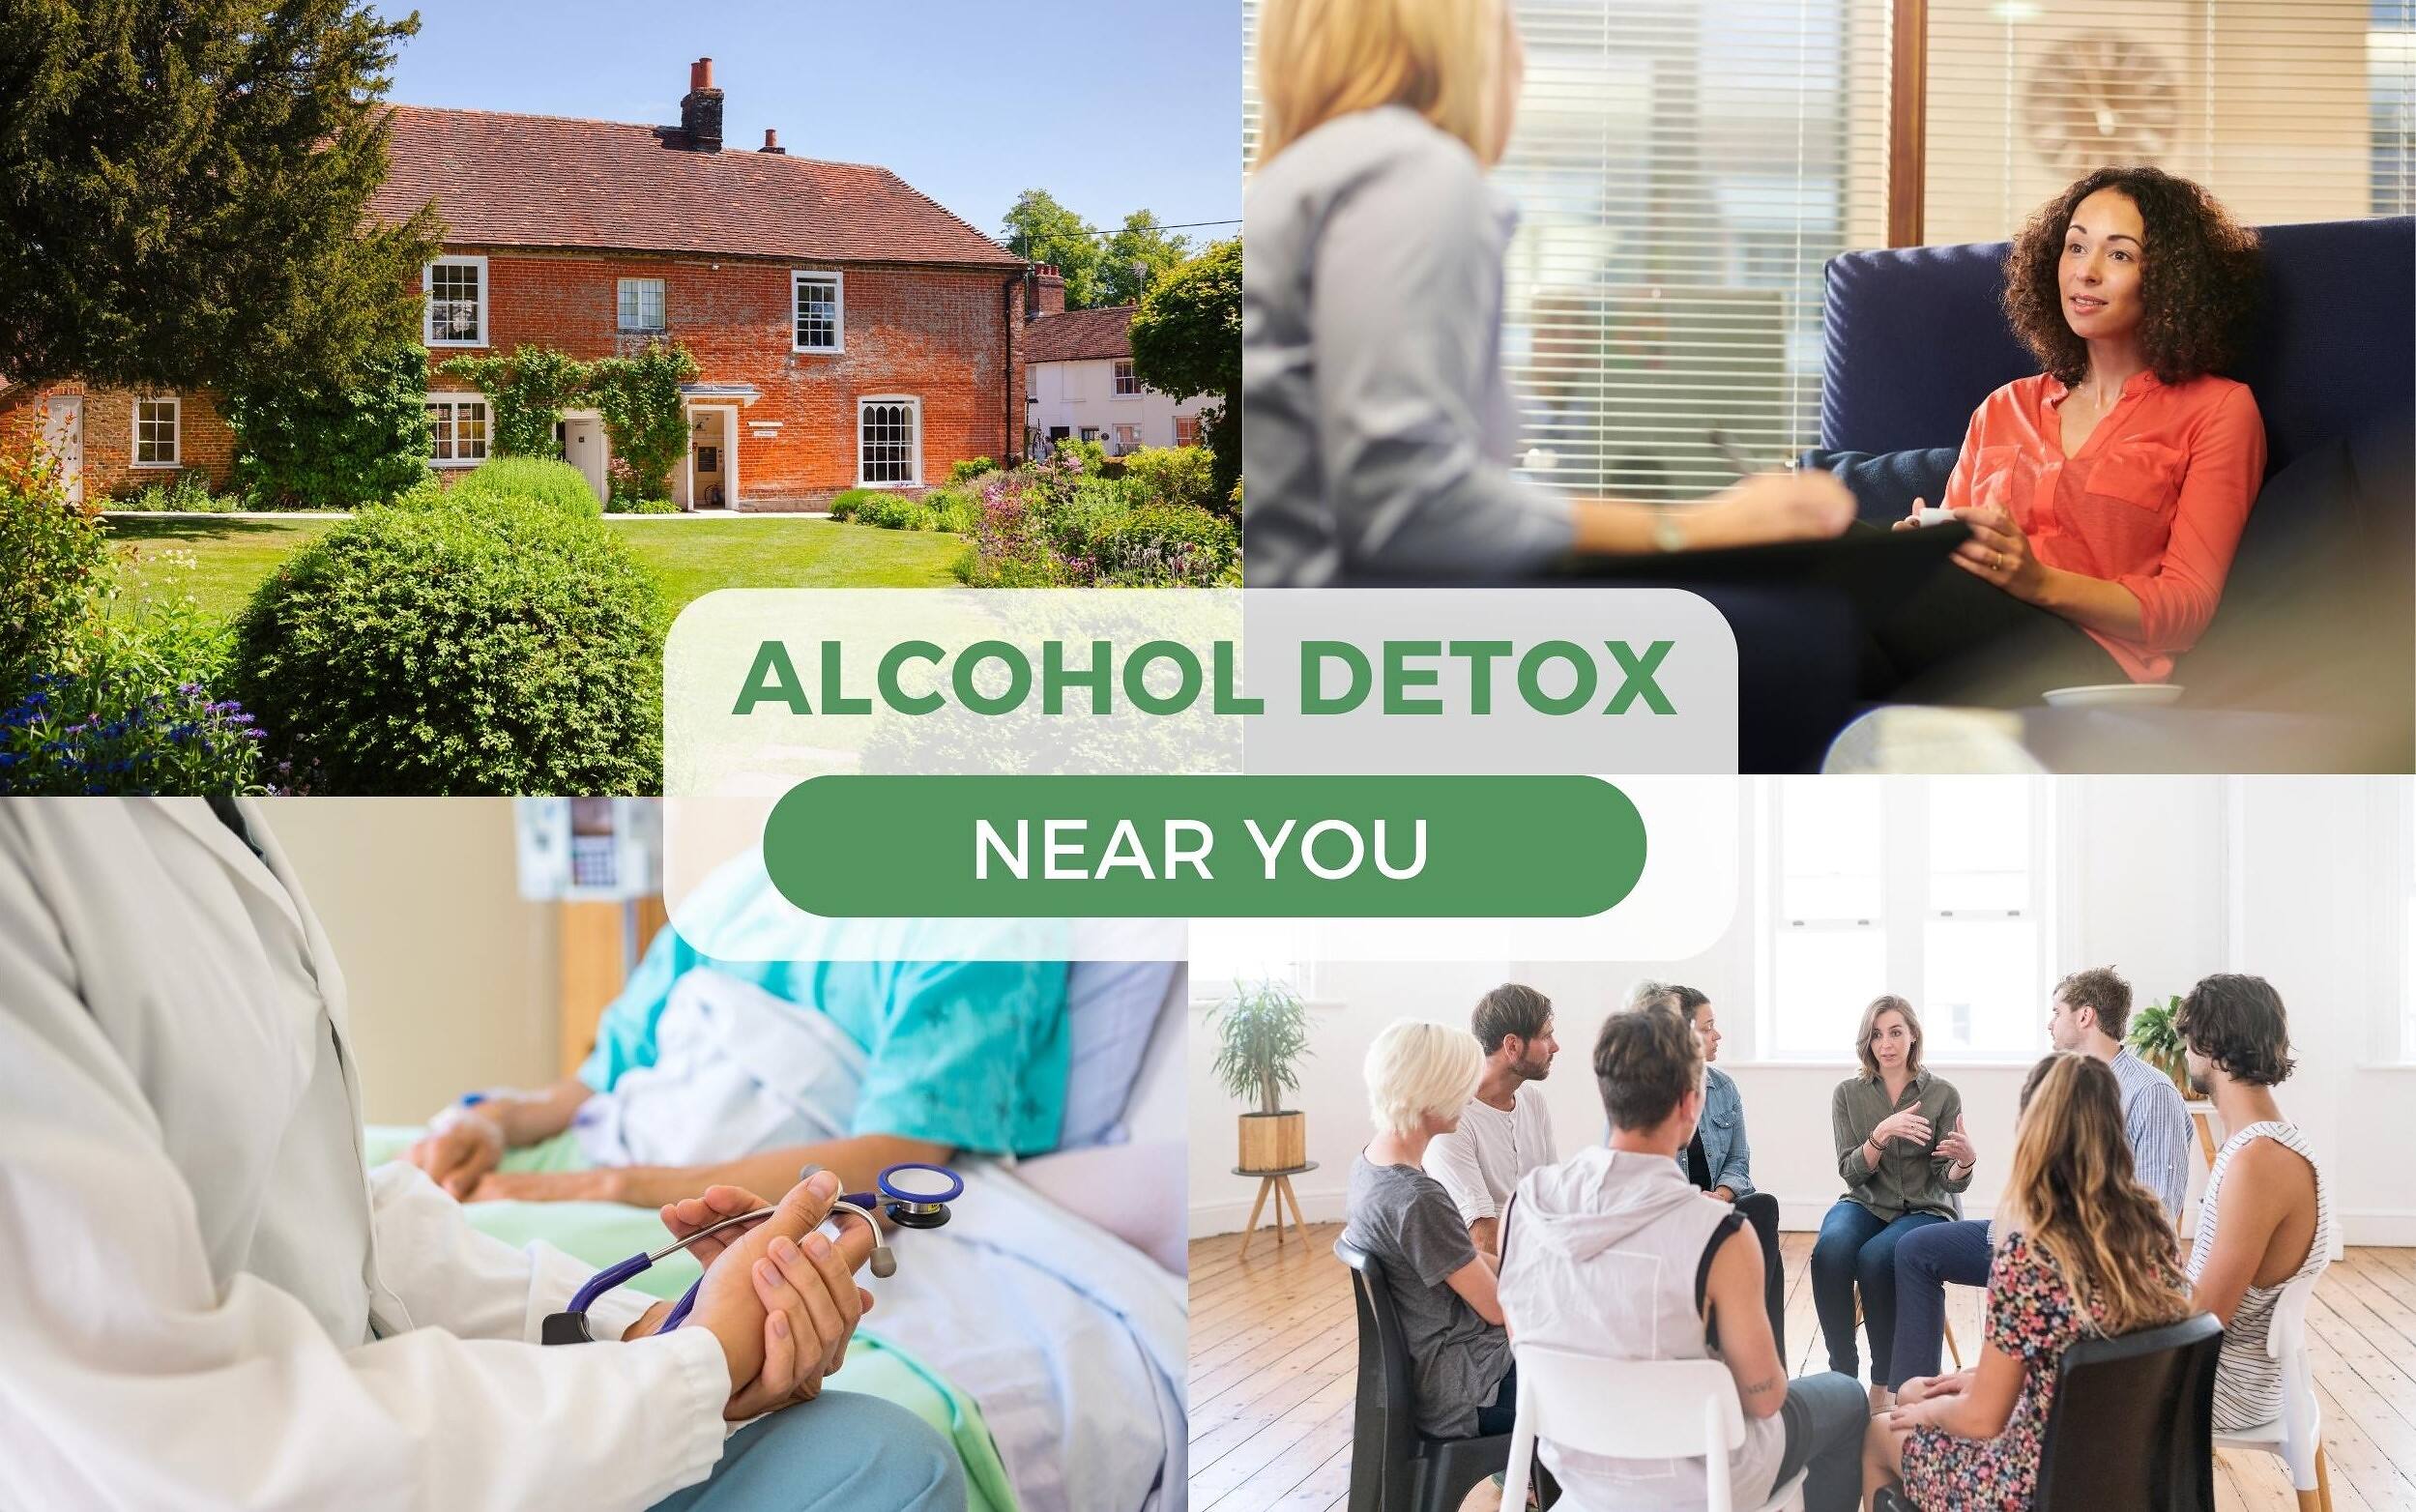 A collage of images depicting alcohol detox services, including a serene facility, a consultation session, medical care, and a support group meeting.